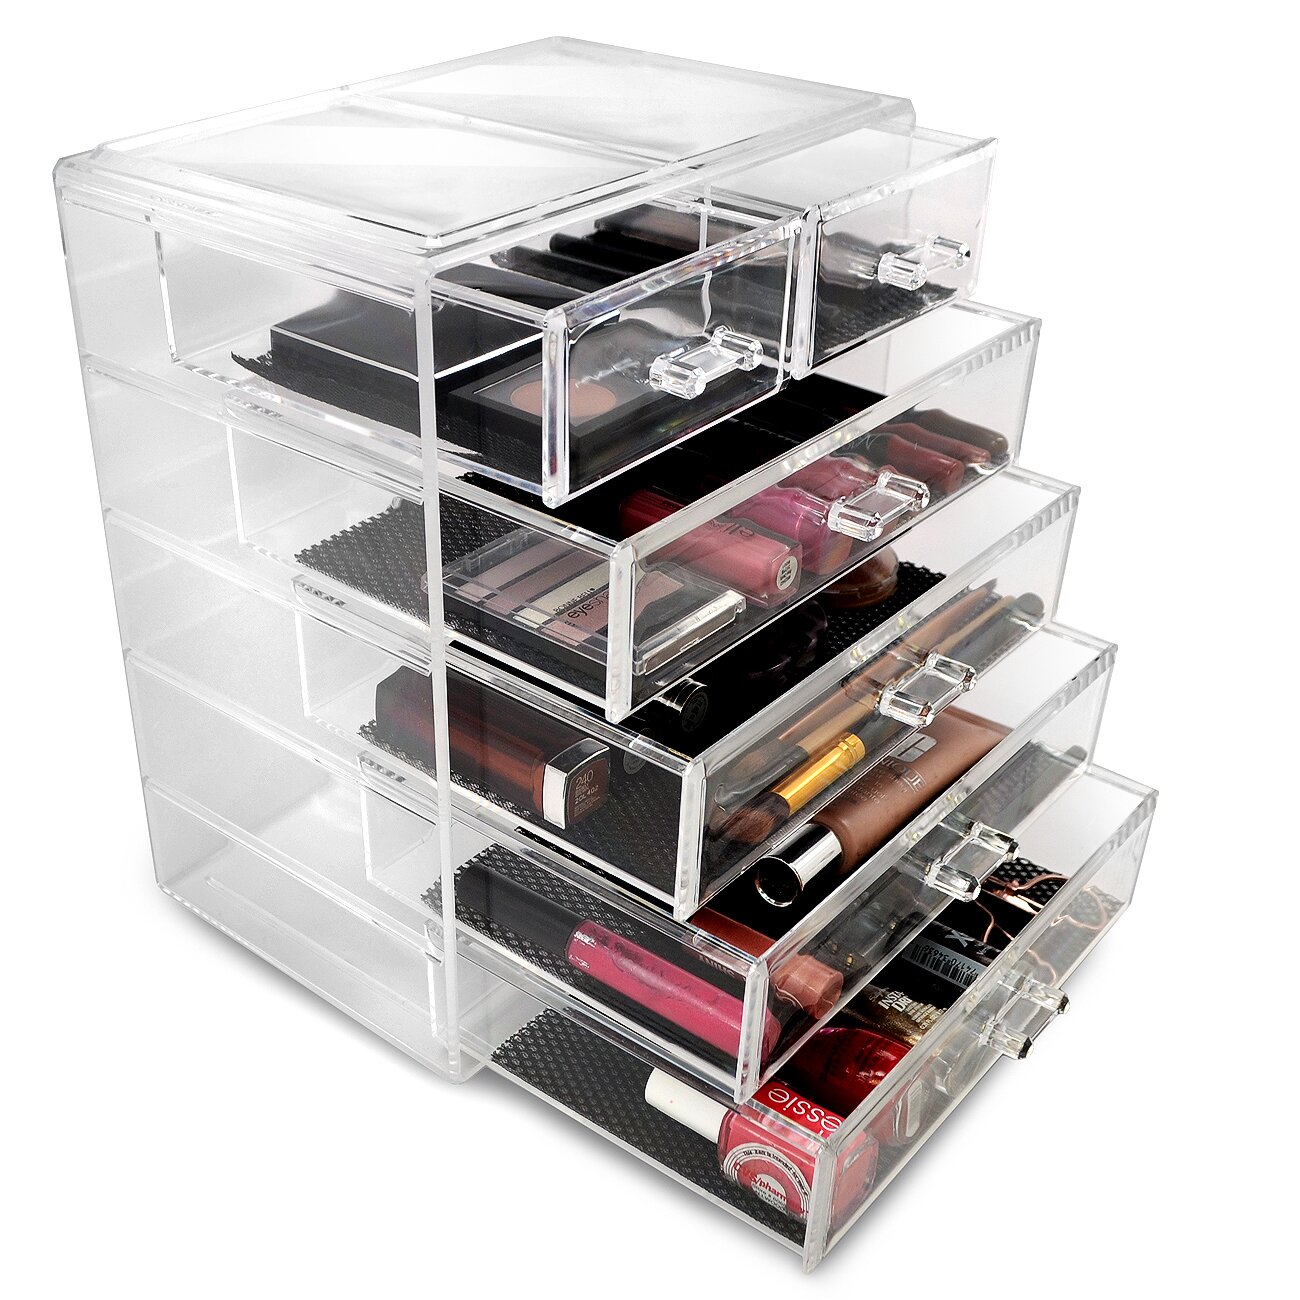 Acrylic Drawer Makeup Organizer with Removable Drawers 4 Large and 2 Small Drawers MUP STRG42